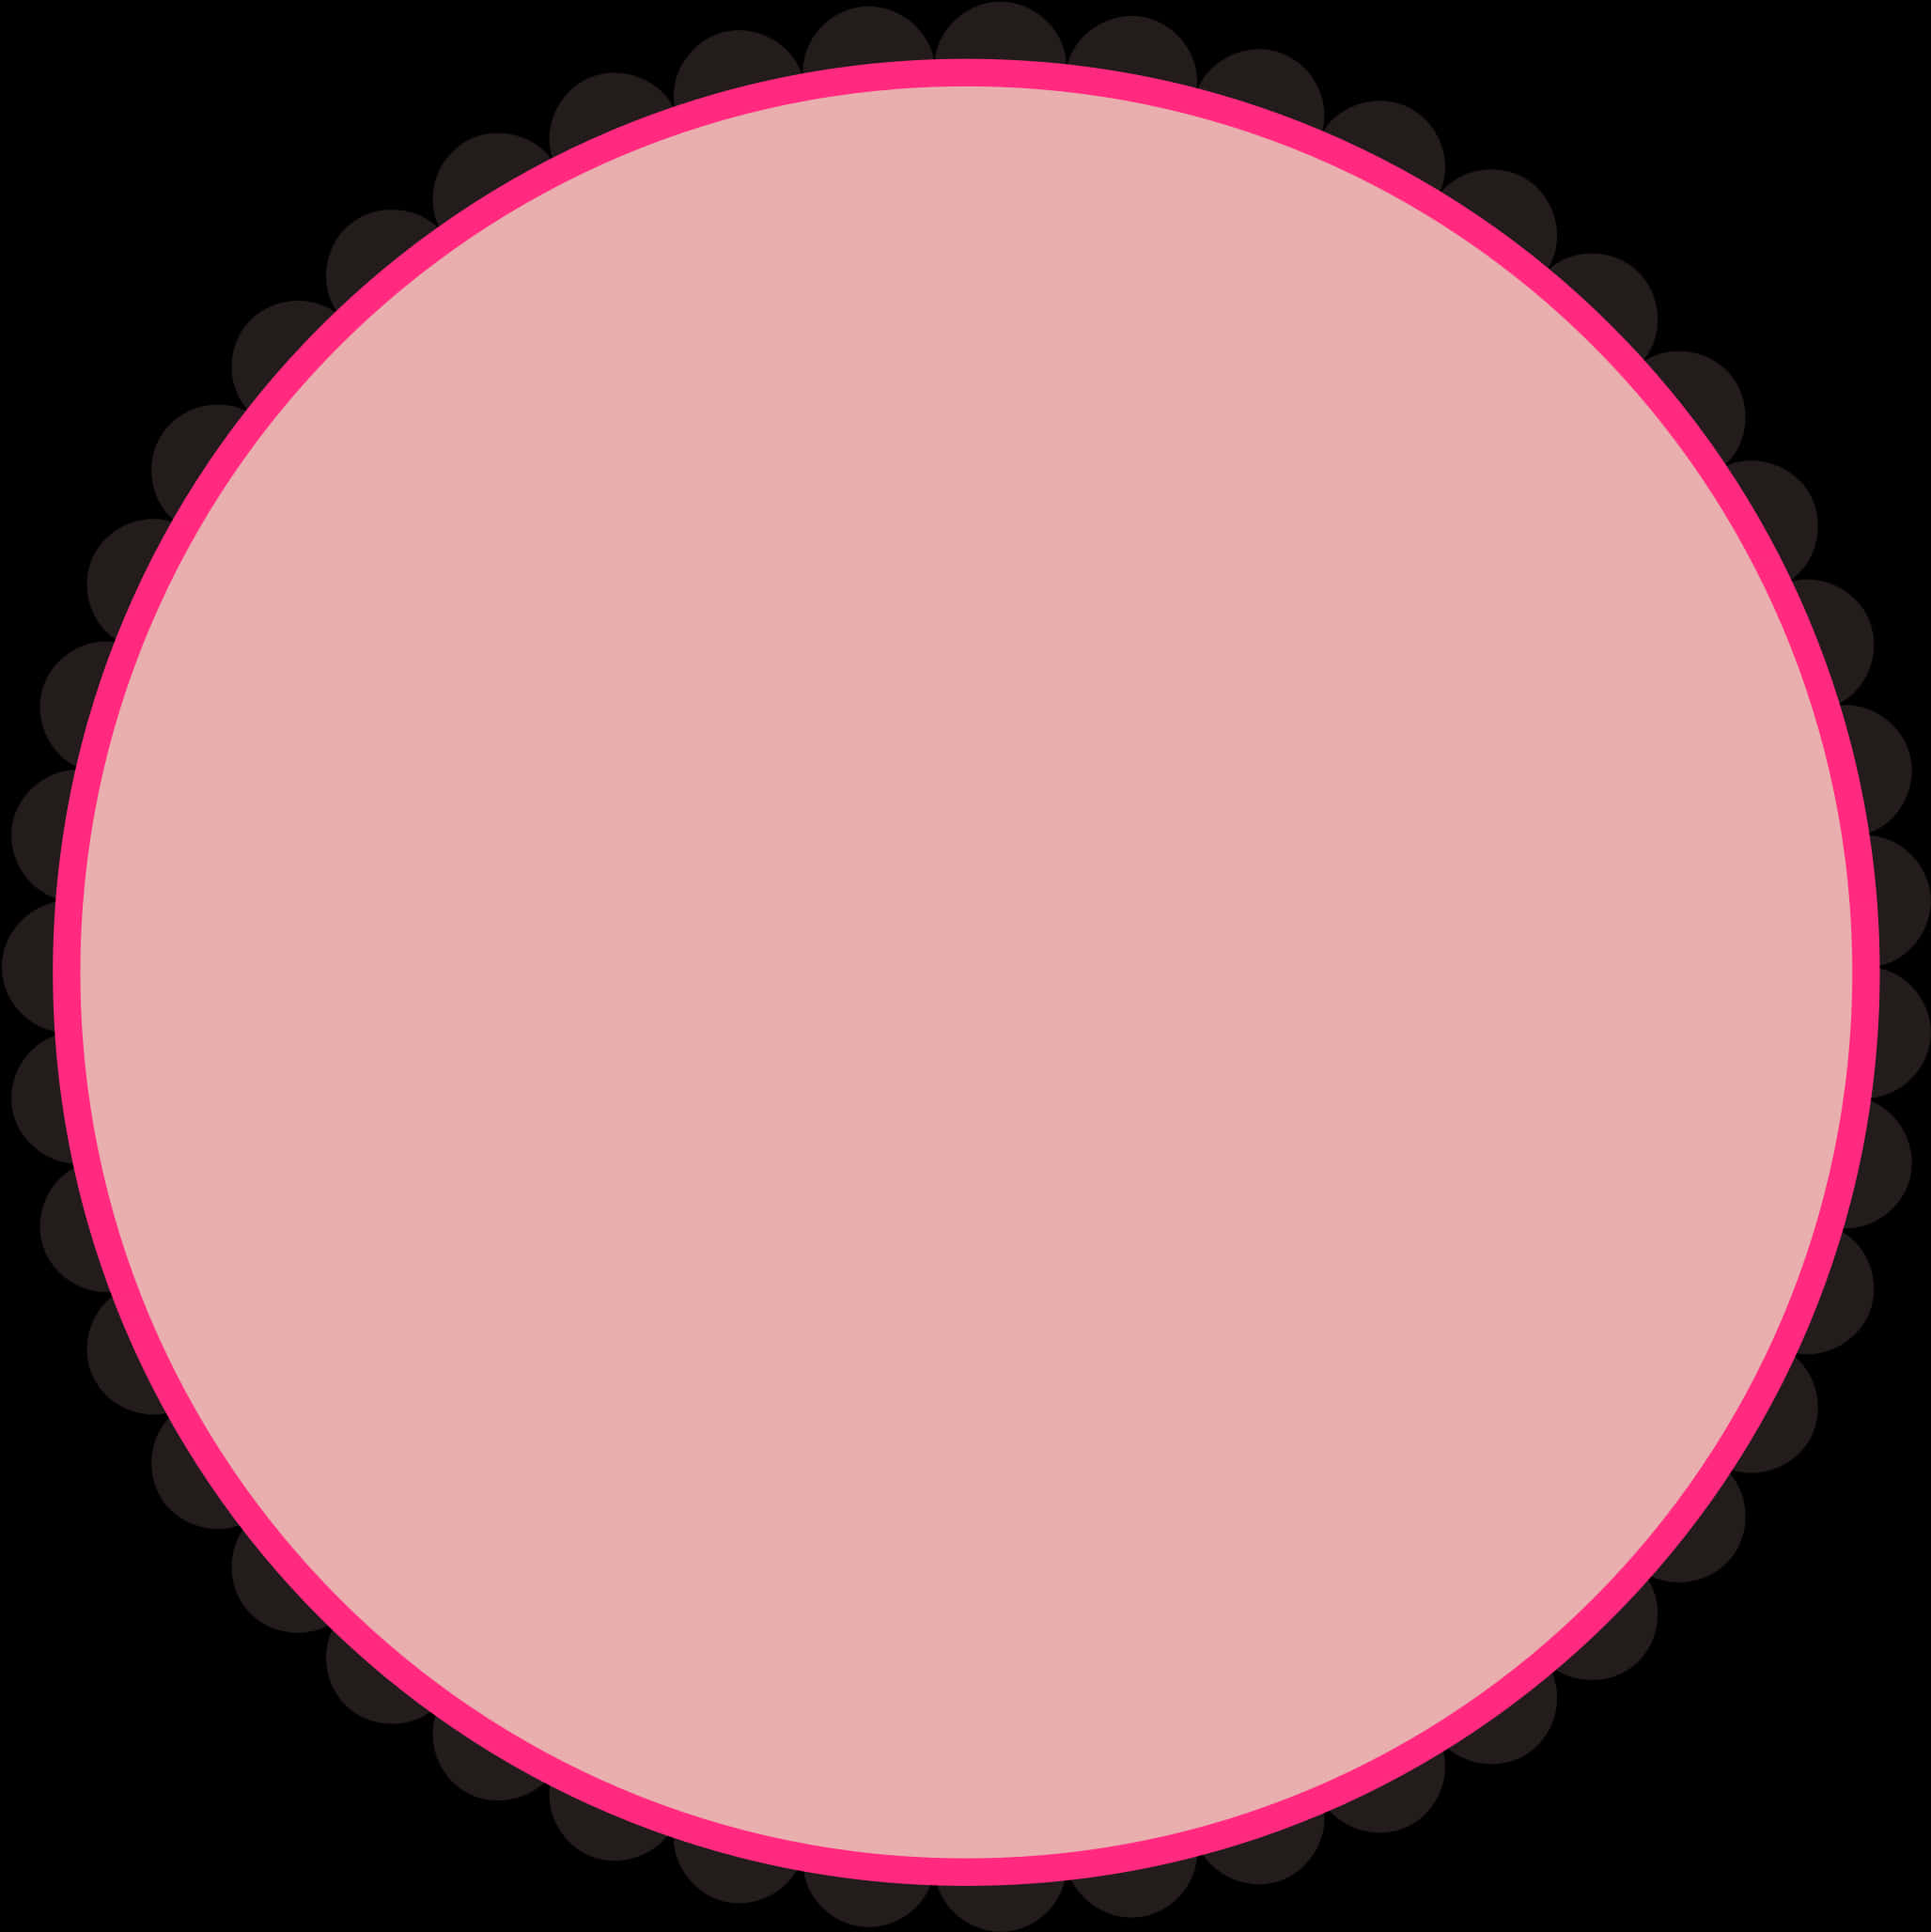 Round Pink Framewith Scalloped Edge PNG image